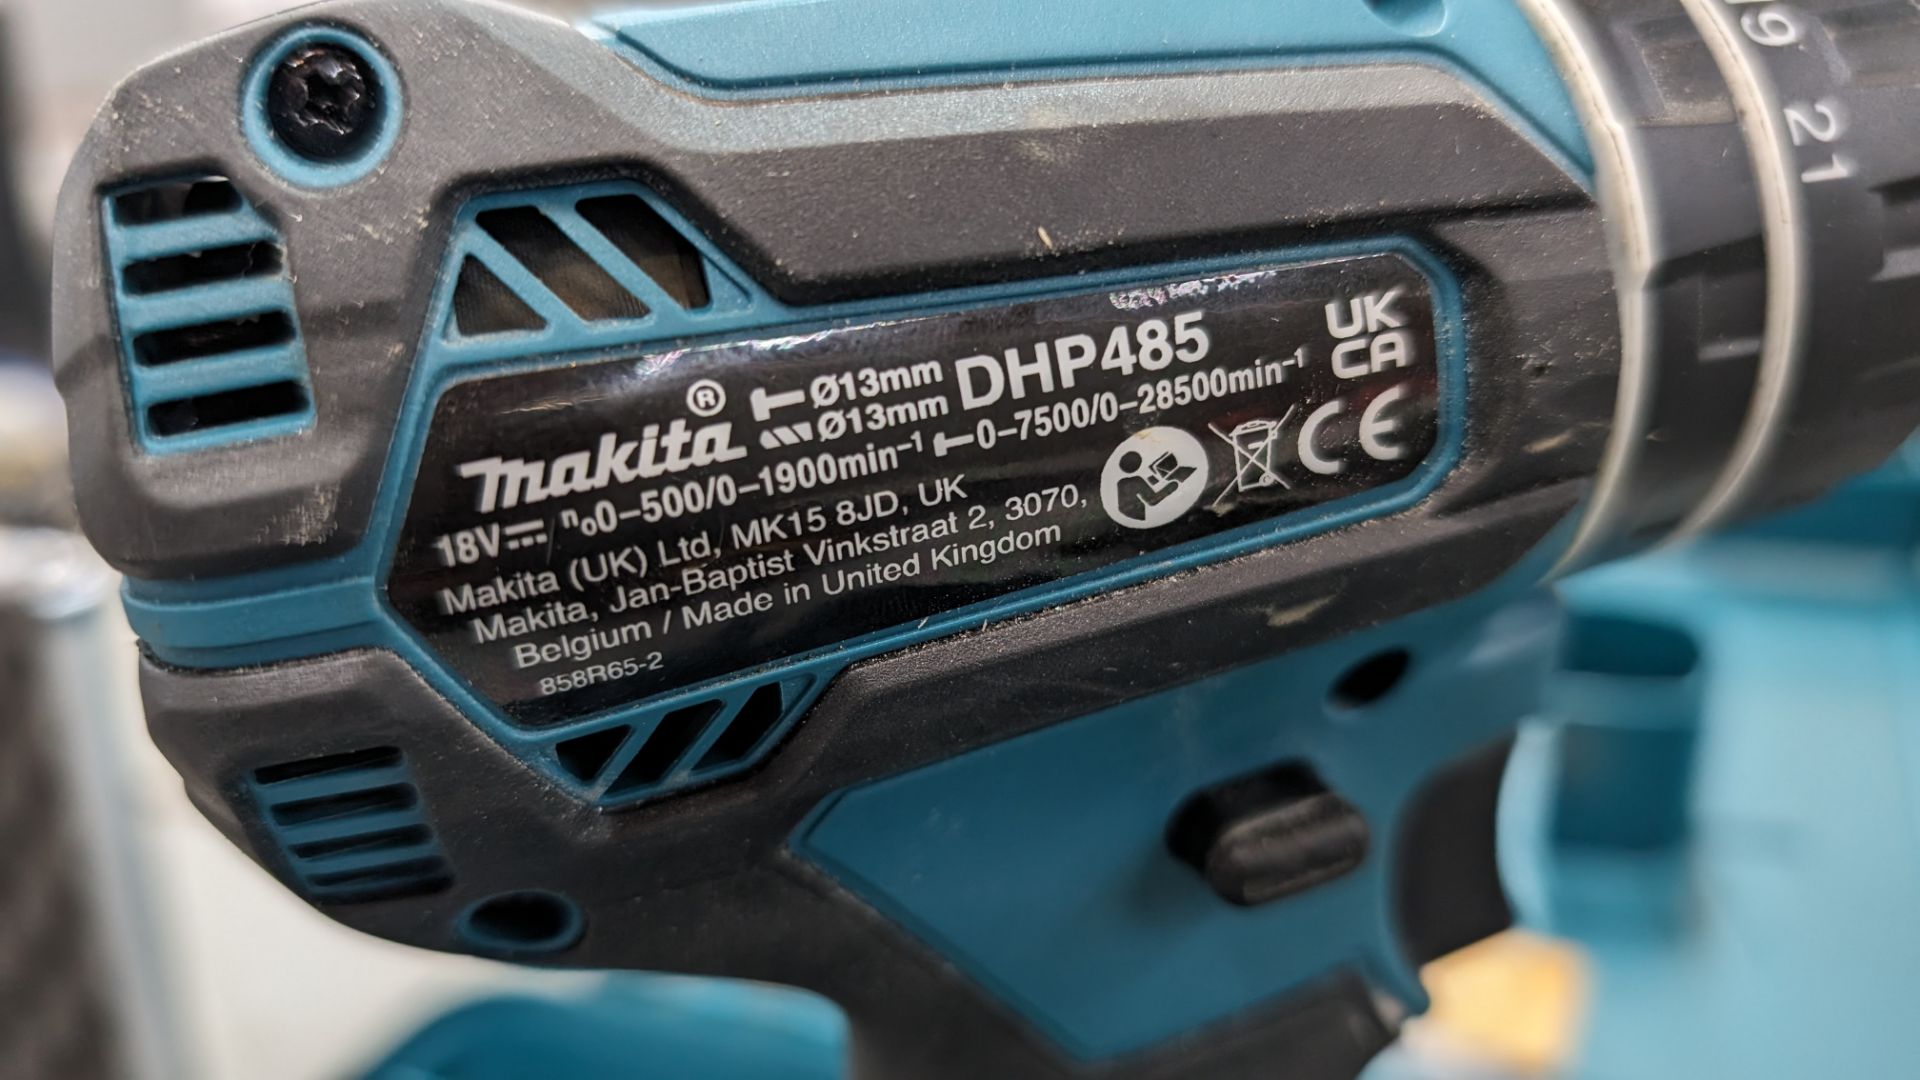 Makita cordless driver model DHP485 including 18V battery, charger & dedicated case - Image 8 of 12